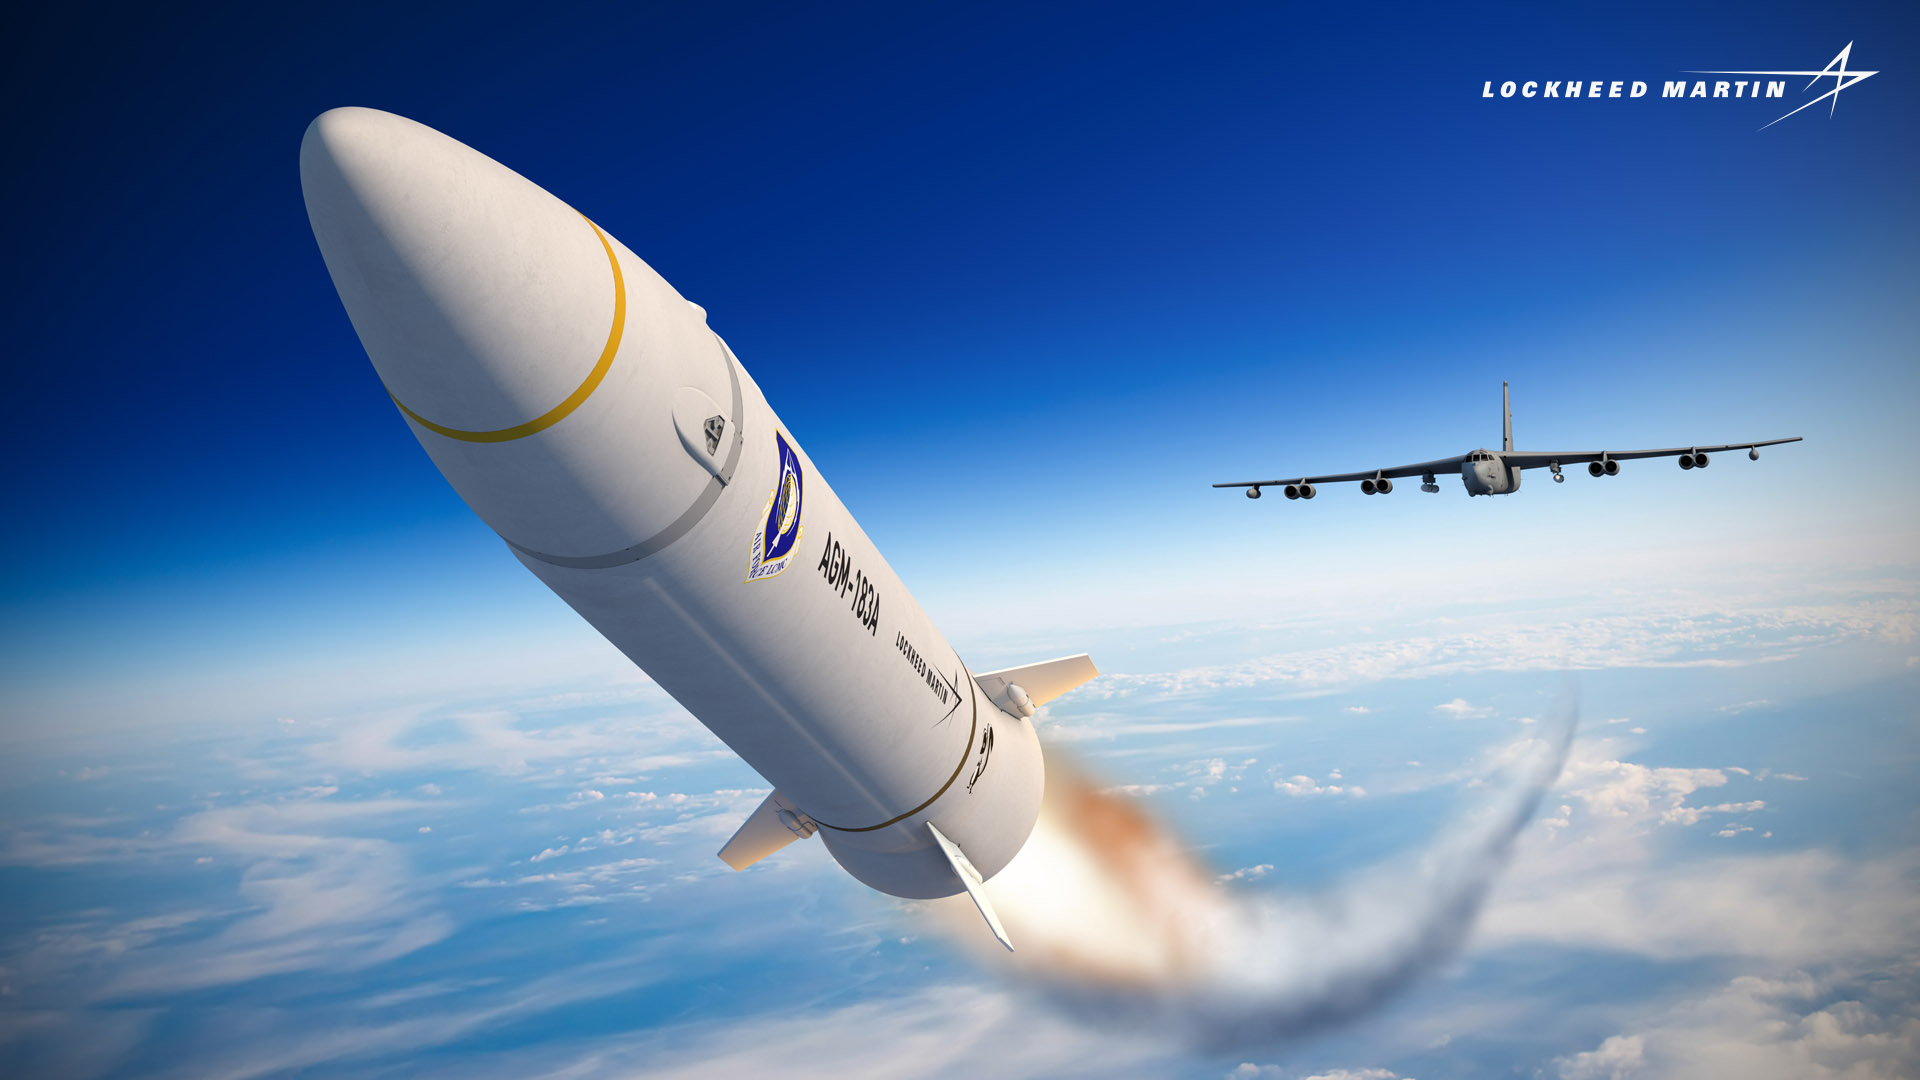 Elevate your Screen with Lockheed Martin Wallpapers | Lockheed Martin